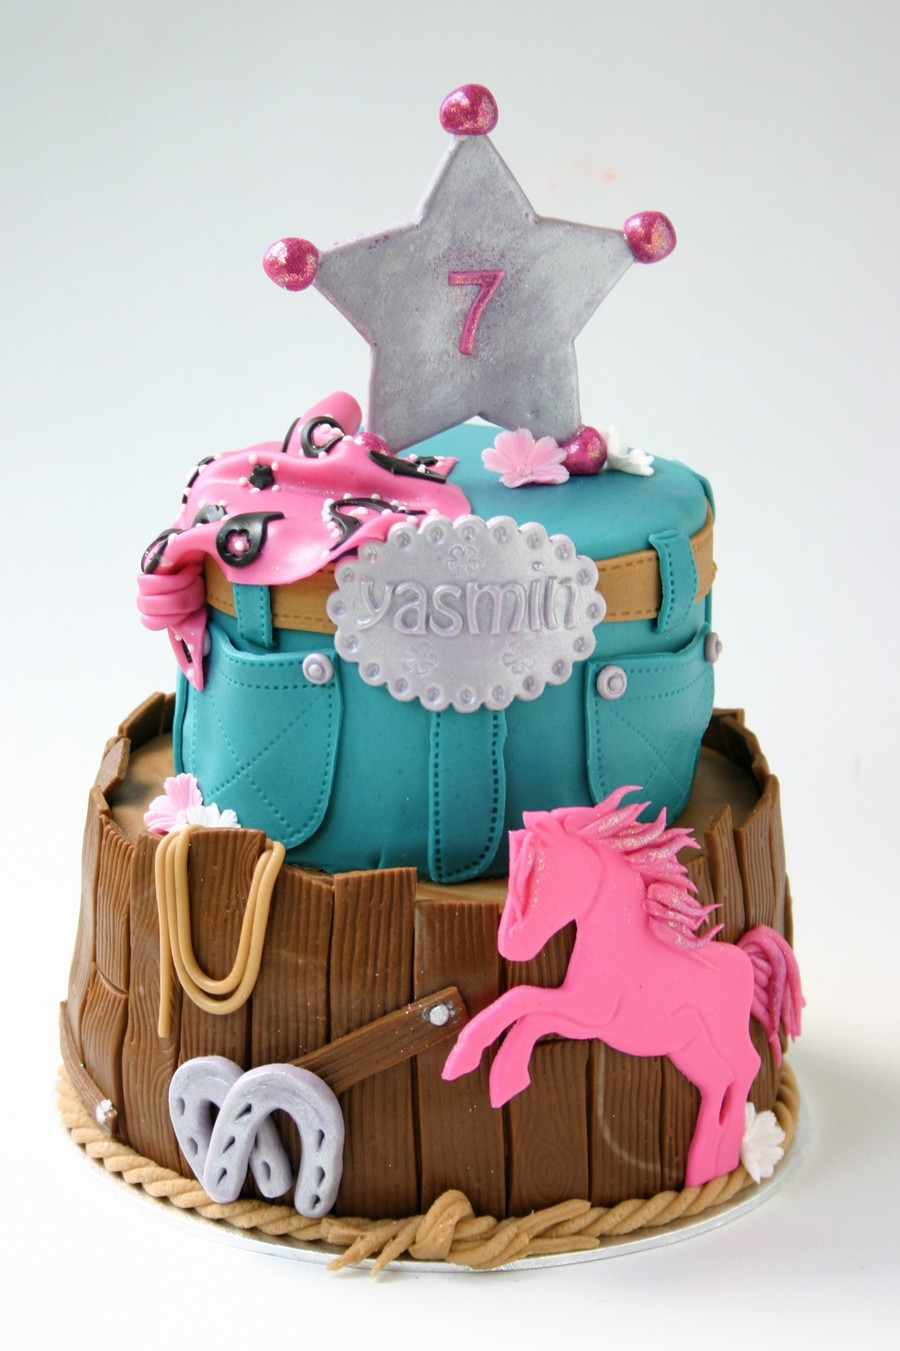 Cowgirl Birthday Cakes
 Cowgirl Cake CakeCentral